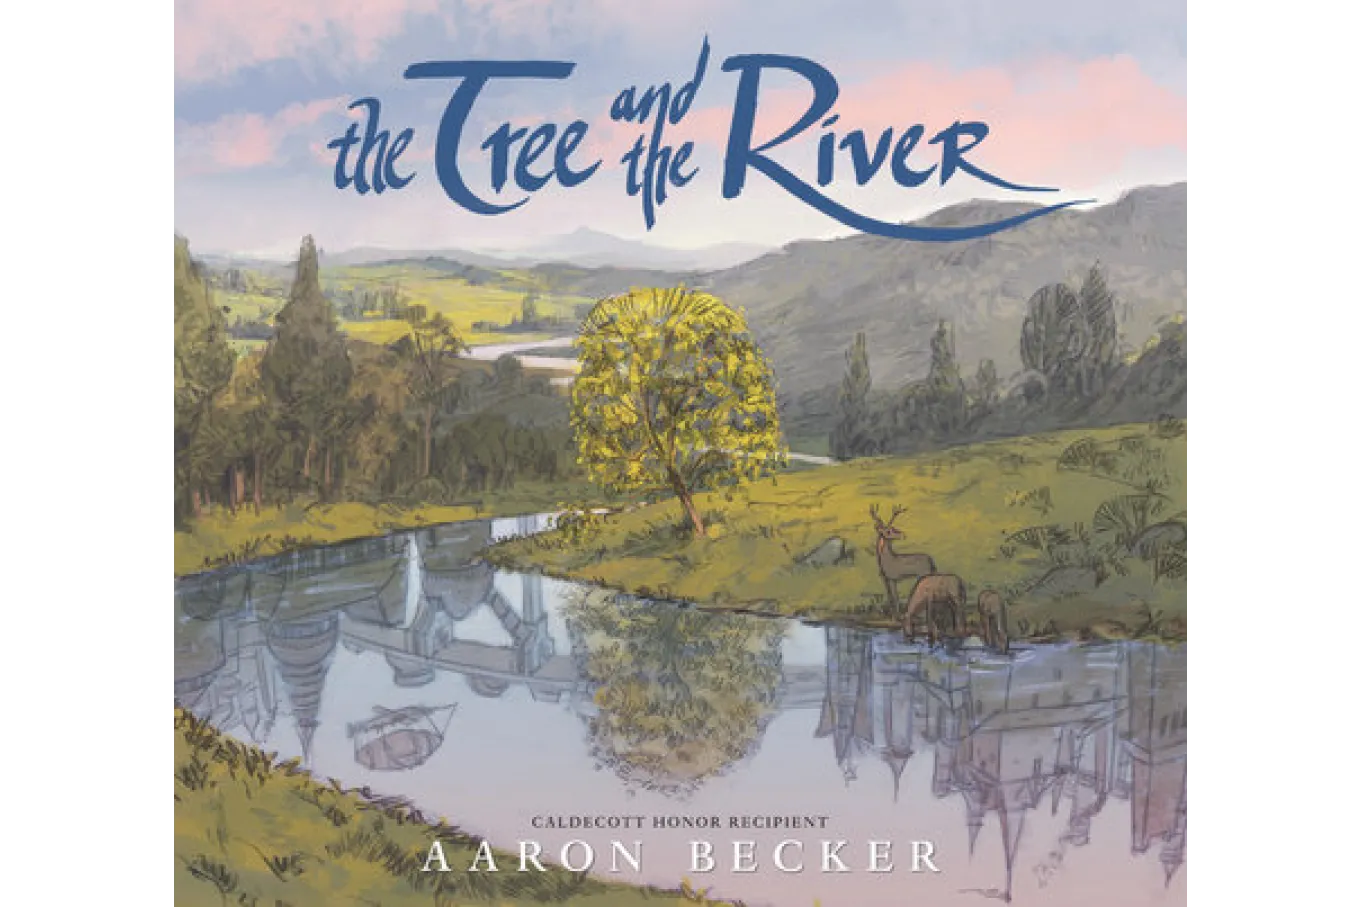 Cover of the Tree and the River